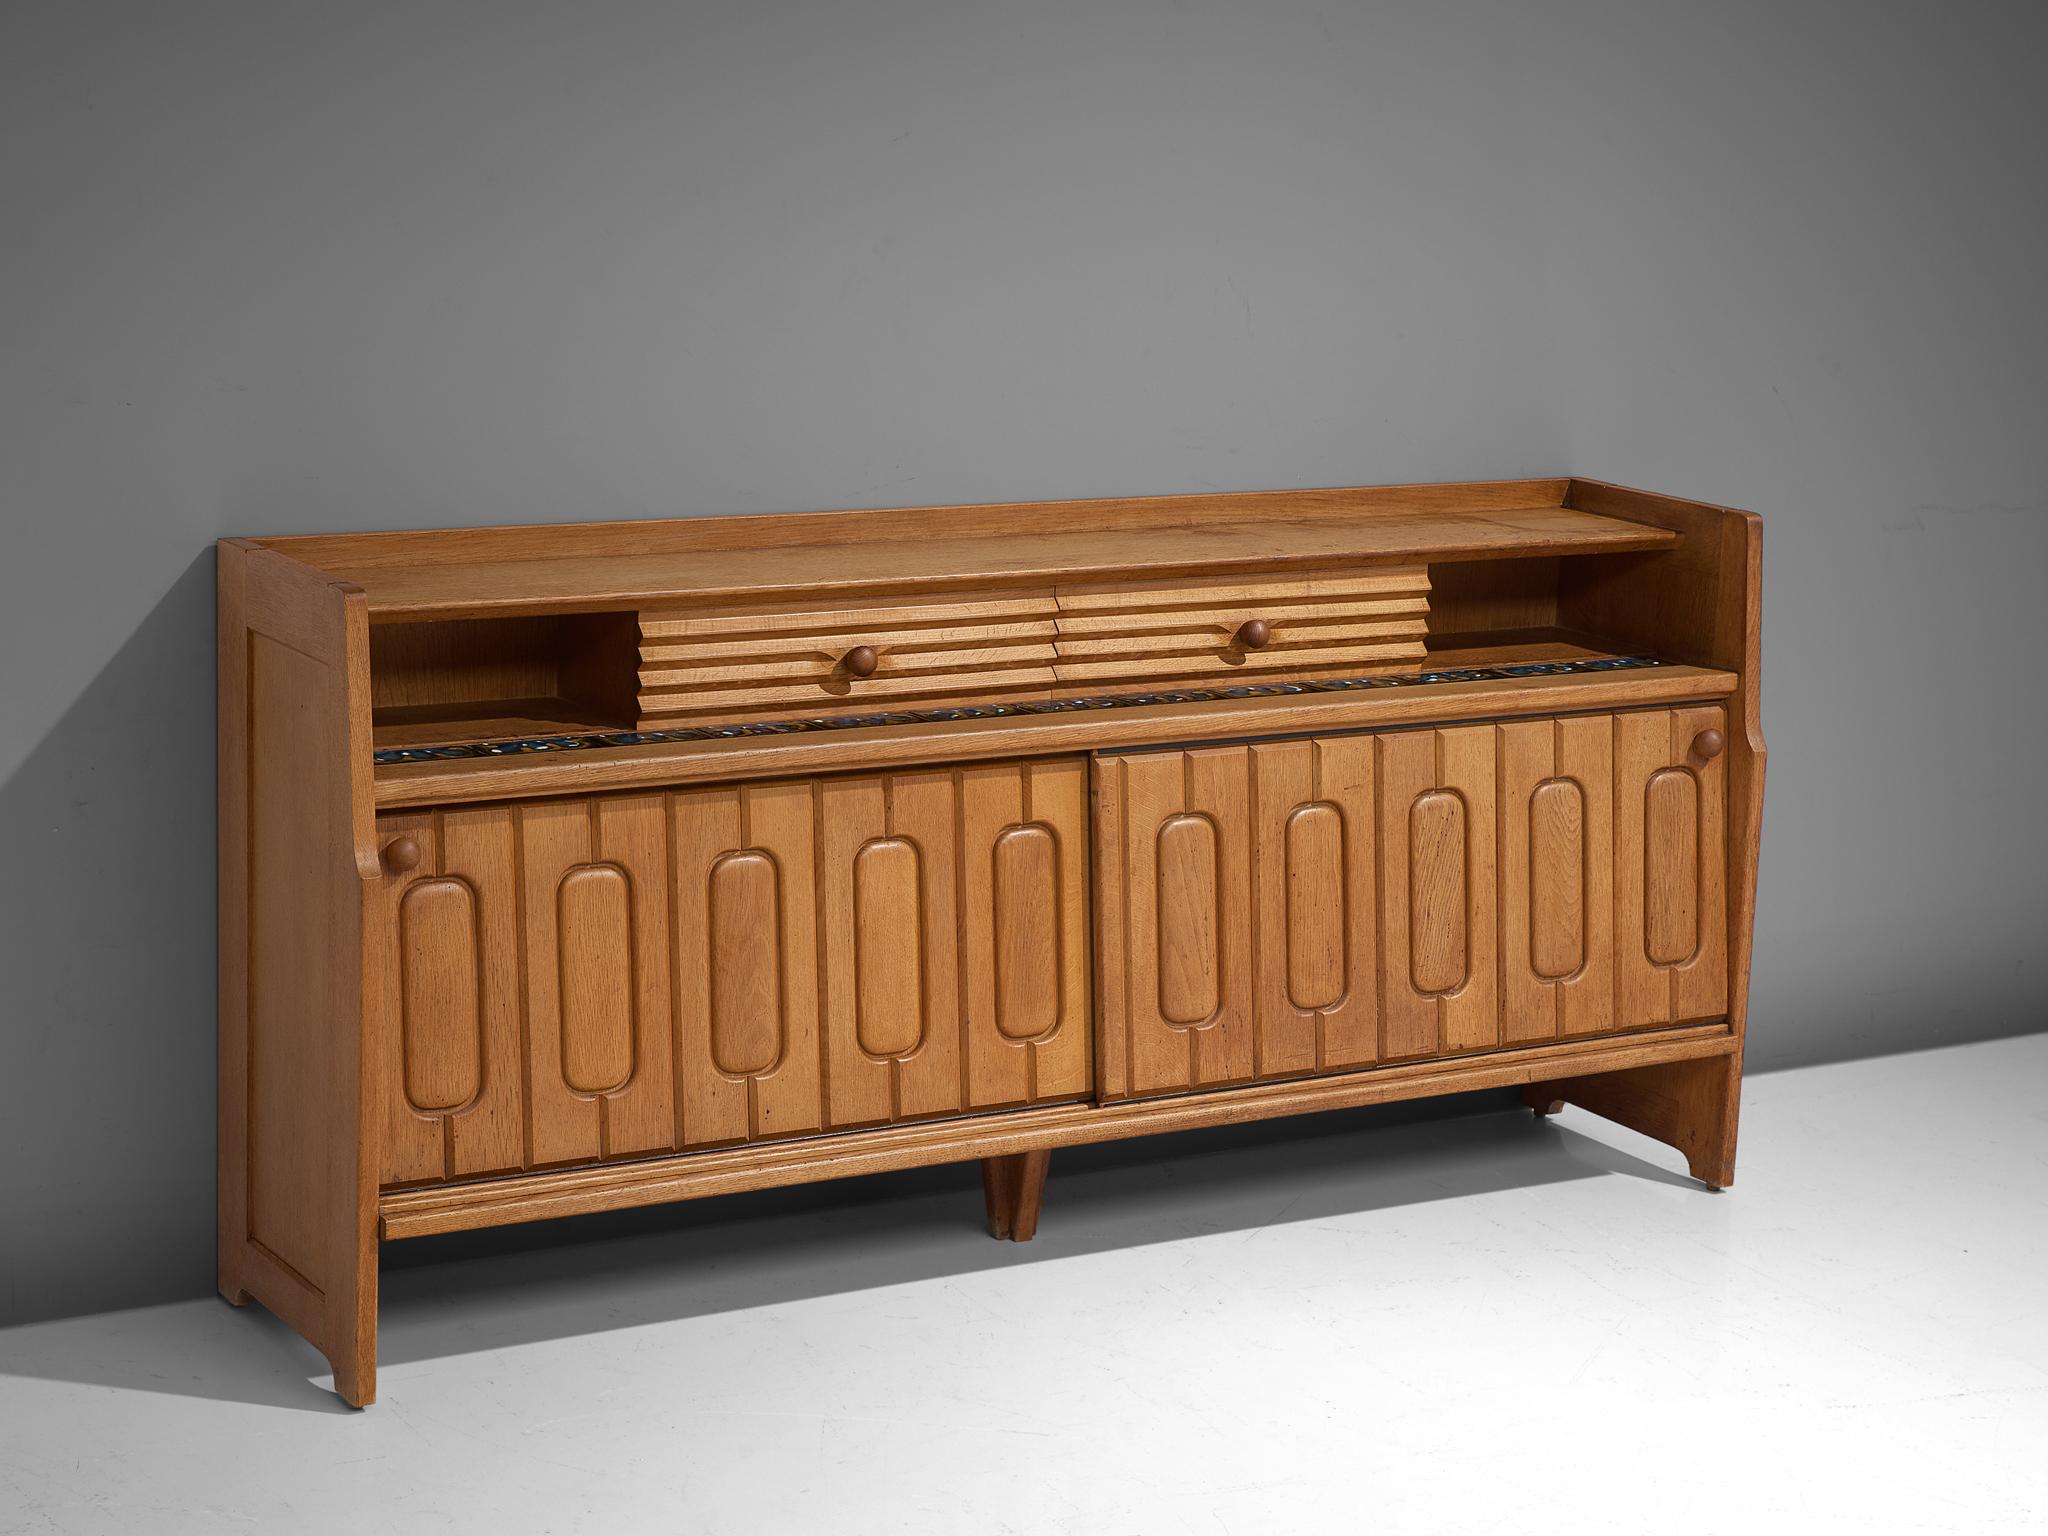 Guillerme et Chambron, sideboard, oak, ceramic, France, 1960s

Credenza in oak by French designer due Guillerme & Chambron. This sideboard is equipped with two sliding-doors and a set of drawers. The front of the sideboard is beautifully detailed